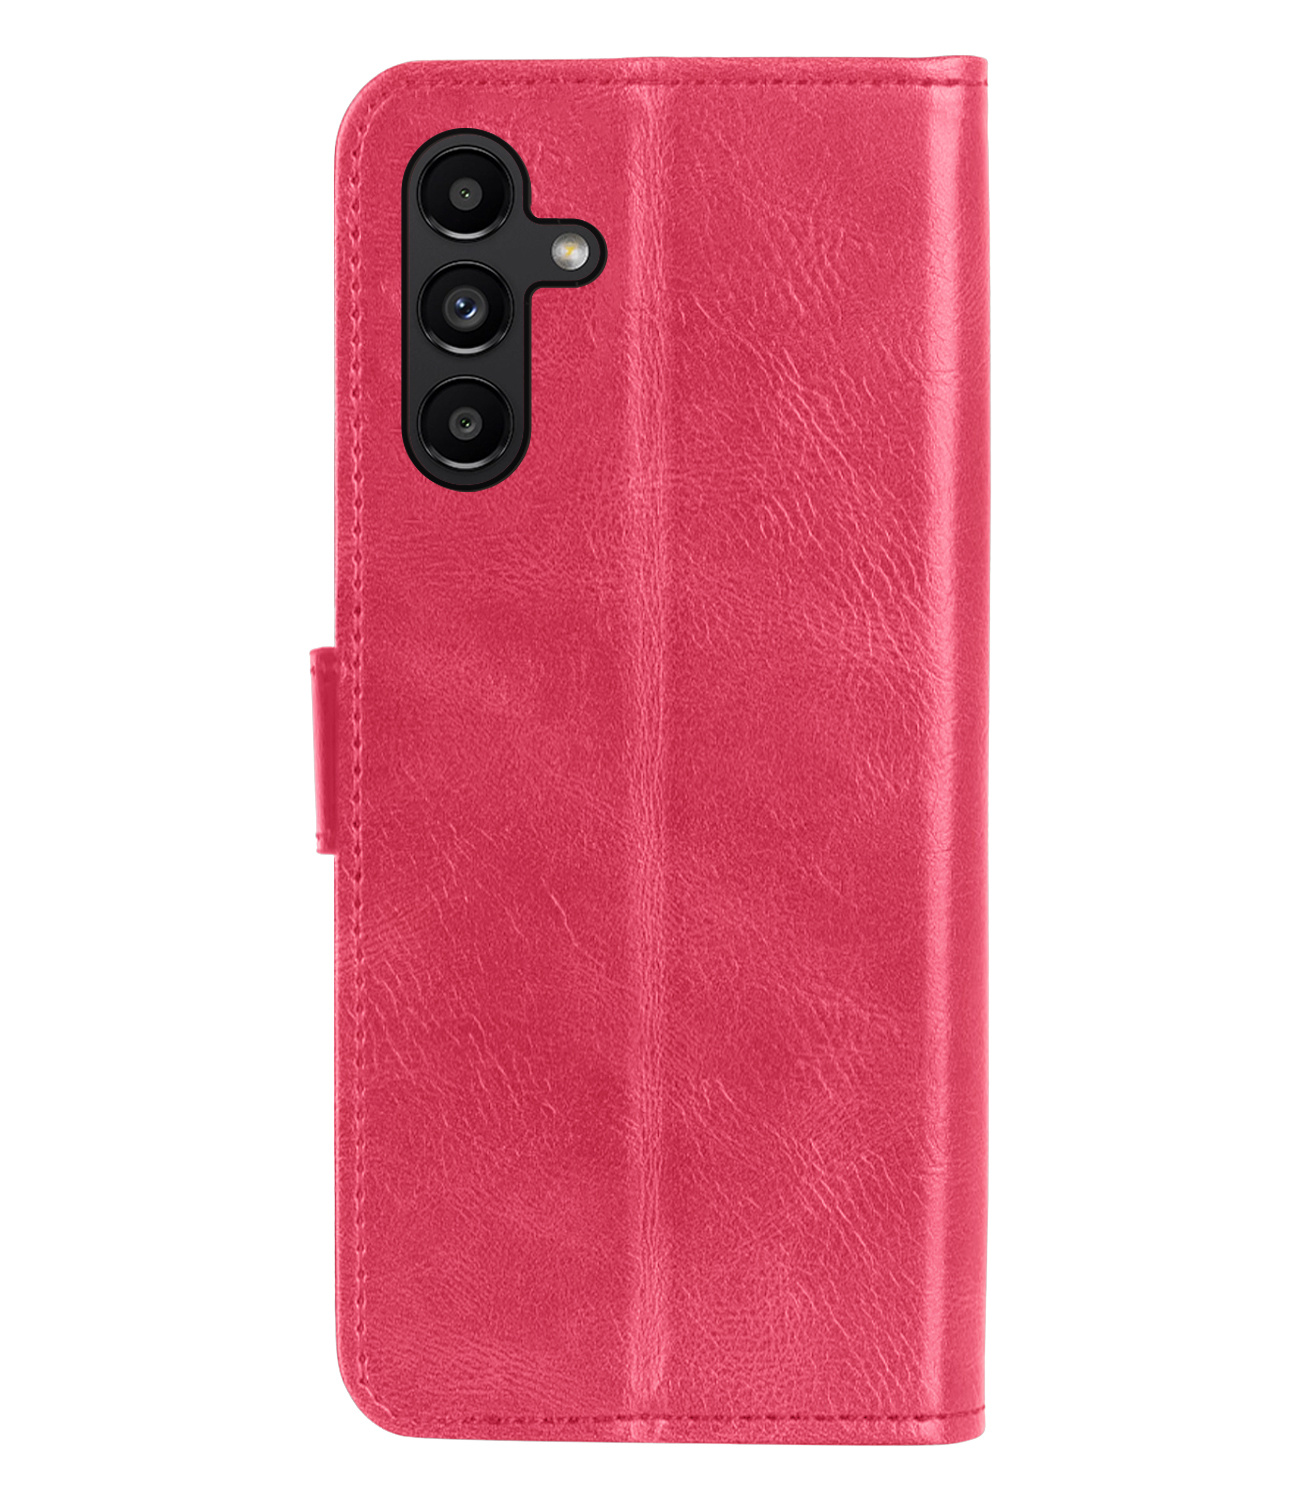 Nomfy Samsung Galaxy A13 5G Hoes Bookcase Donker Roze - Flipcase Donker Roze - Samsung Galaxy A13 5G Book Cover - Samsung Galaxy A13 5G Hoesje Donker Roze